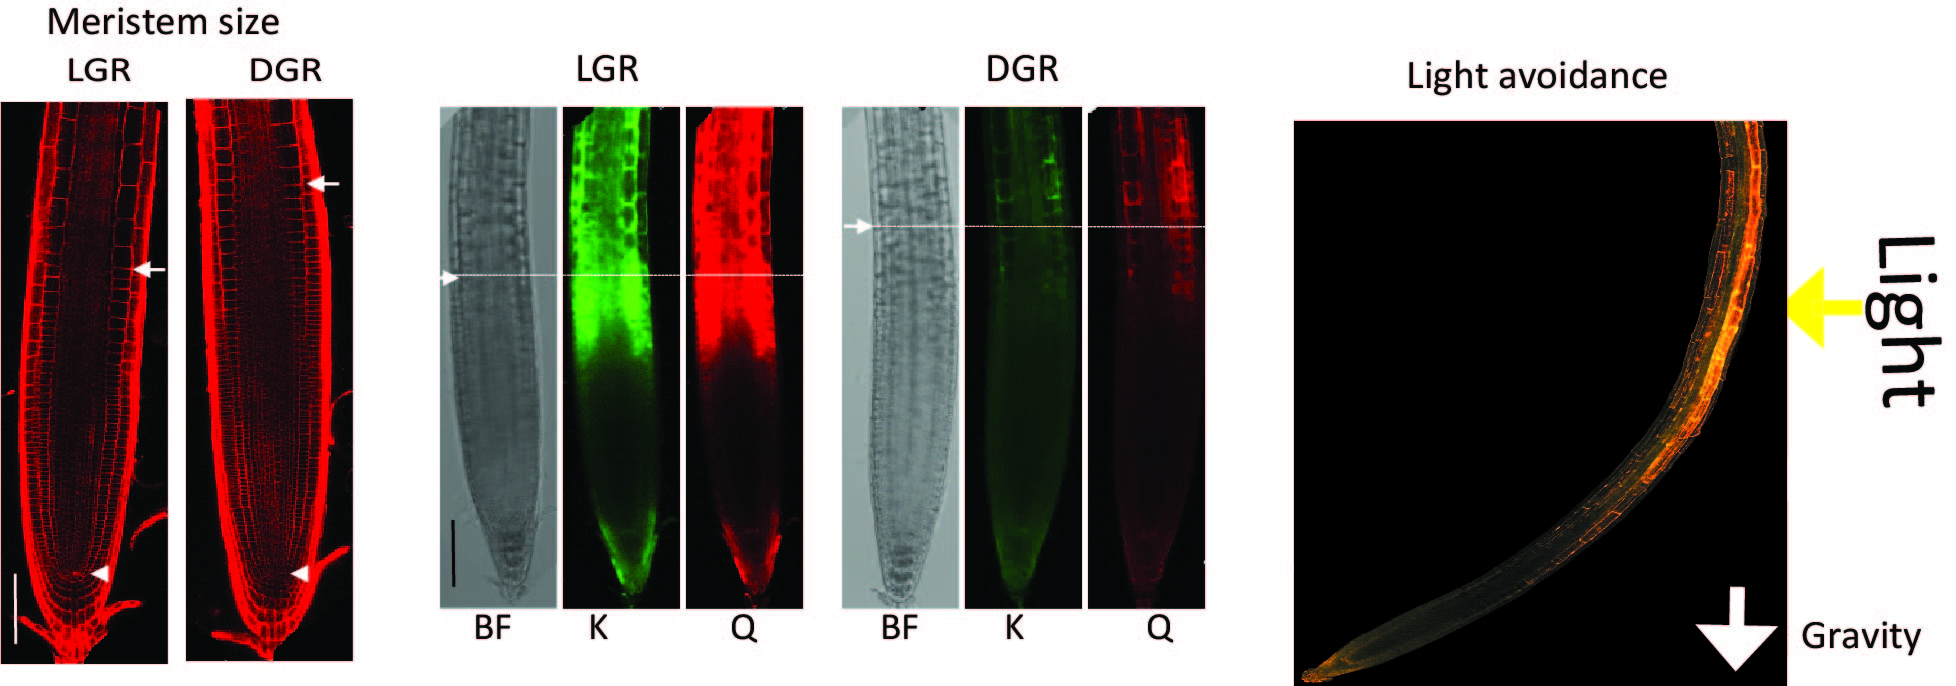 Regulation of lateral root development during nutrient deficiencies